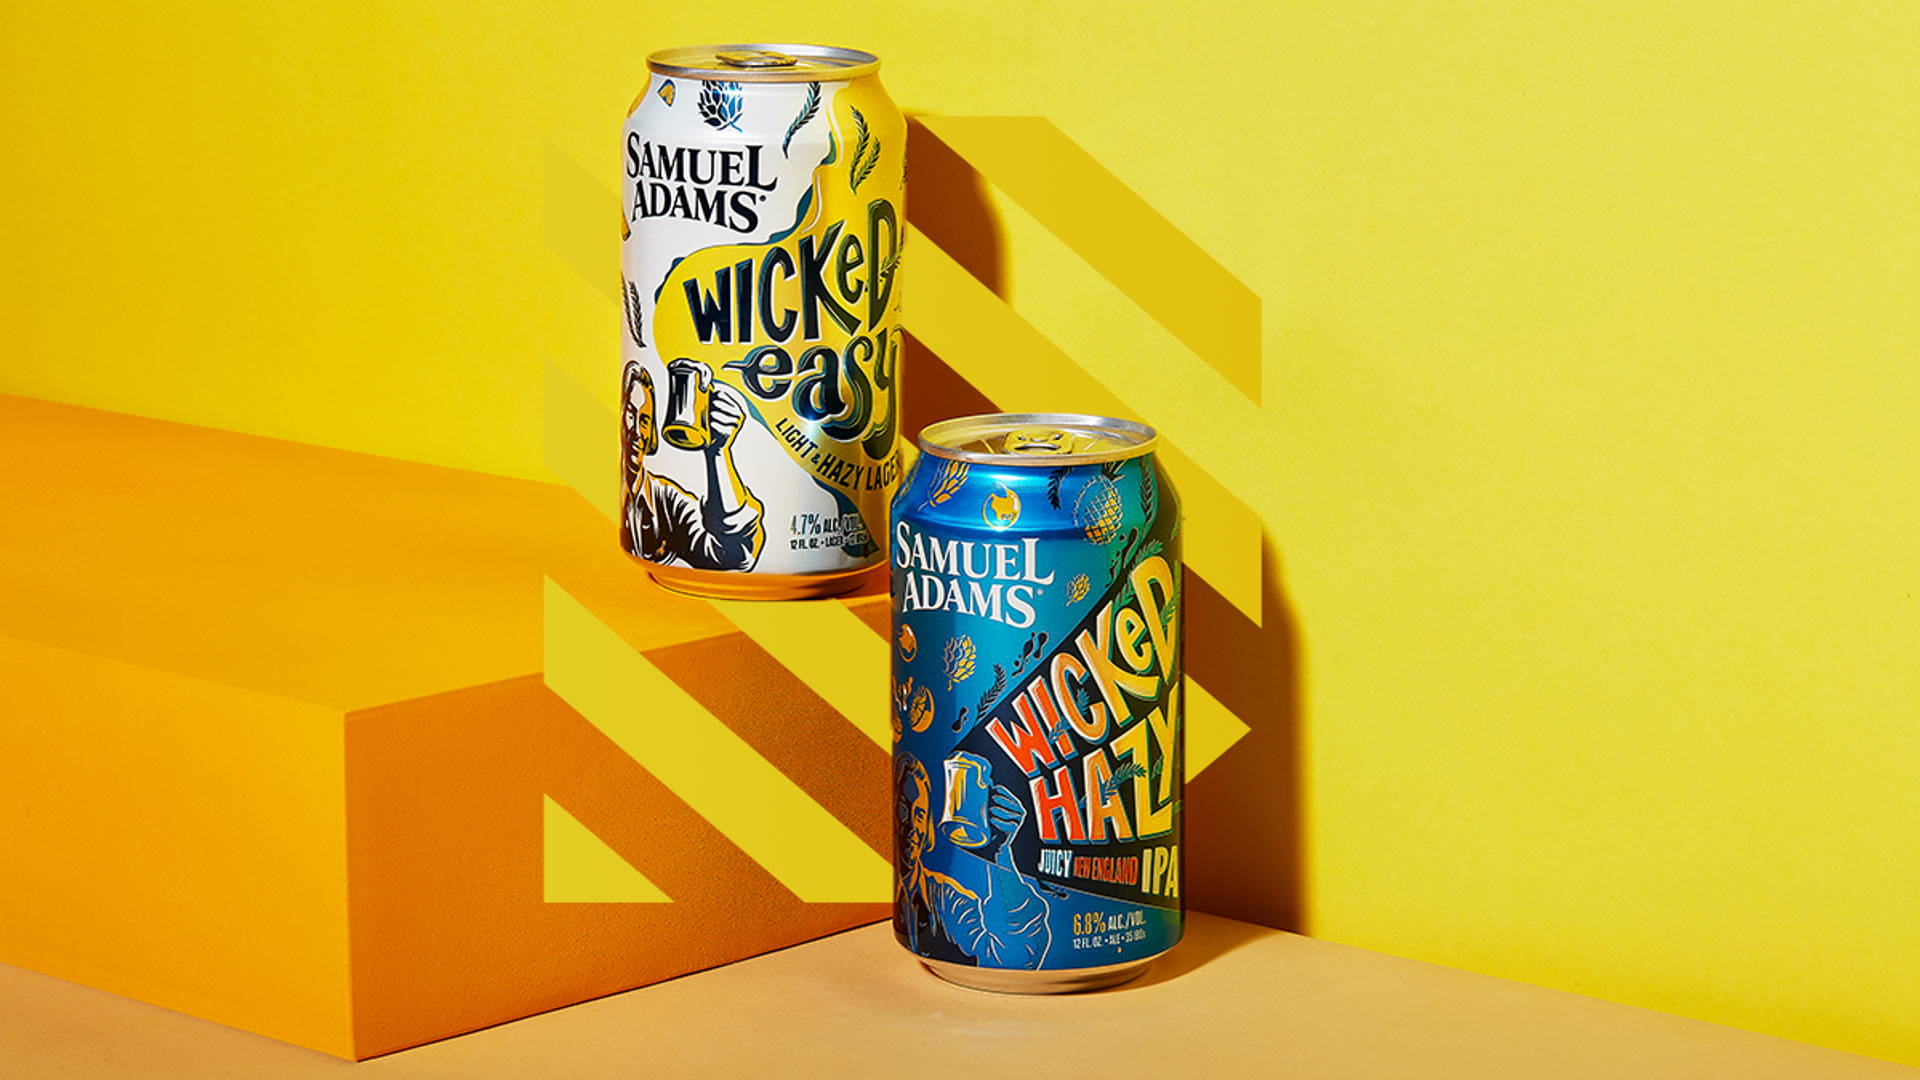 Featured image for This Beer’s Wicked Good: Inside Moxie Sozo's Design for Samuel Adams’ Line of Wicked Beers